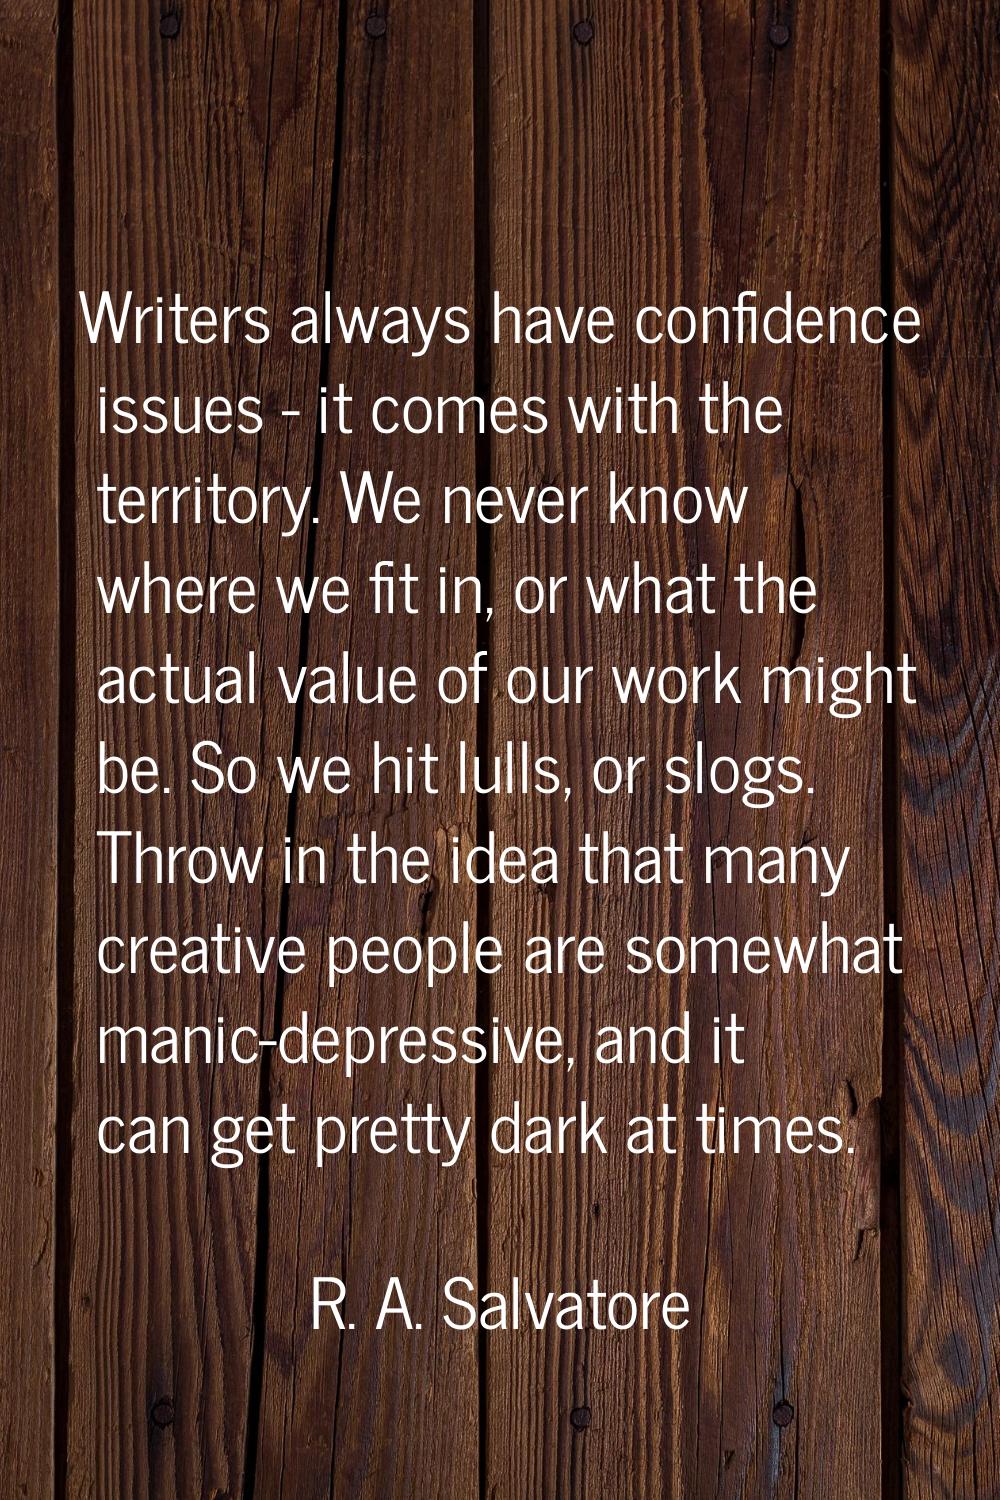 Writers always have confidence issues - it comes with the territory. We never know where we fit in,